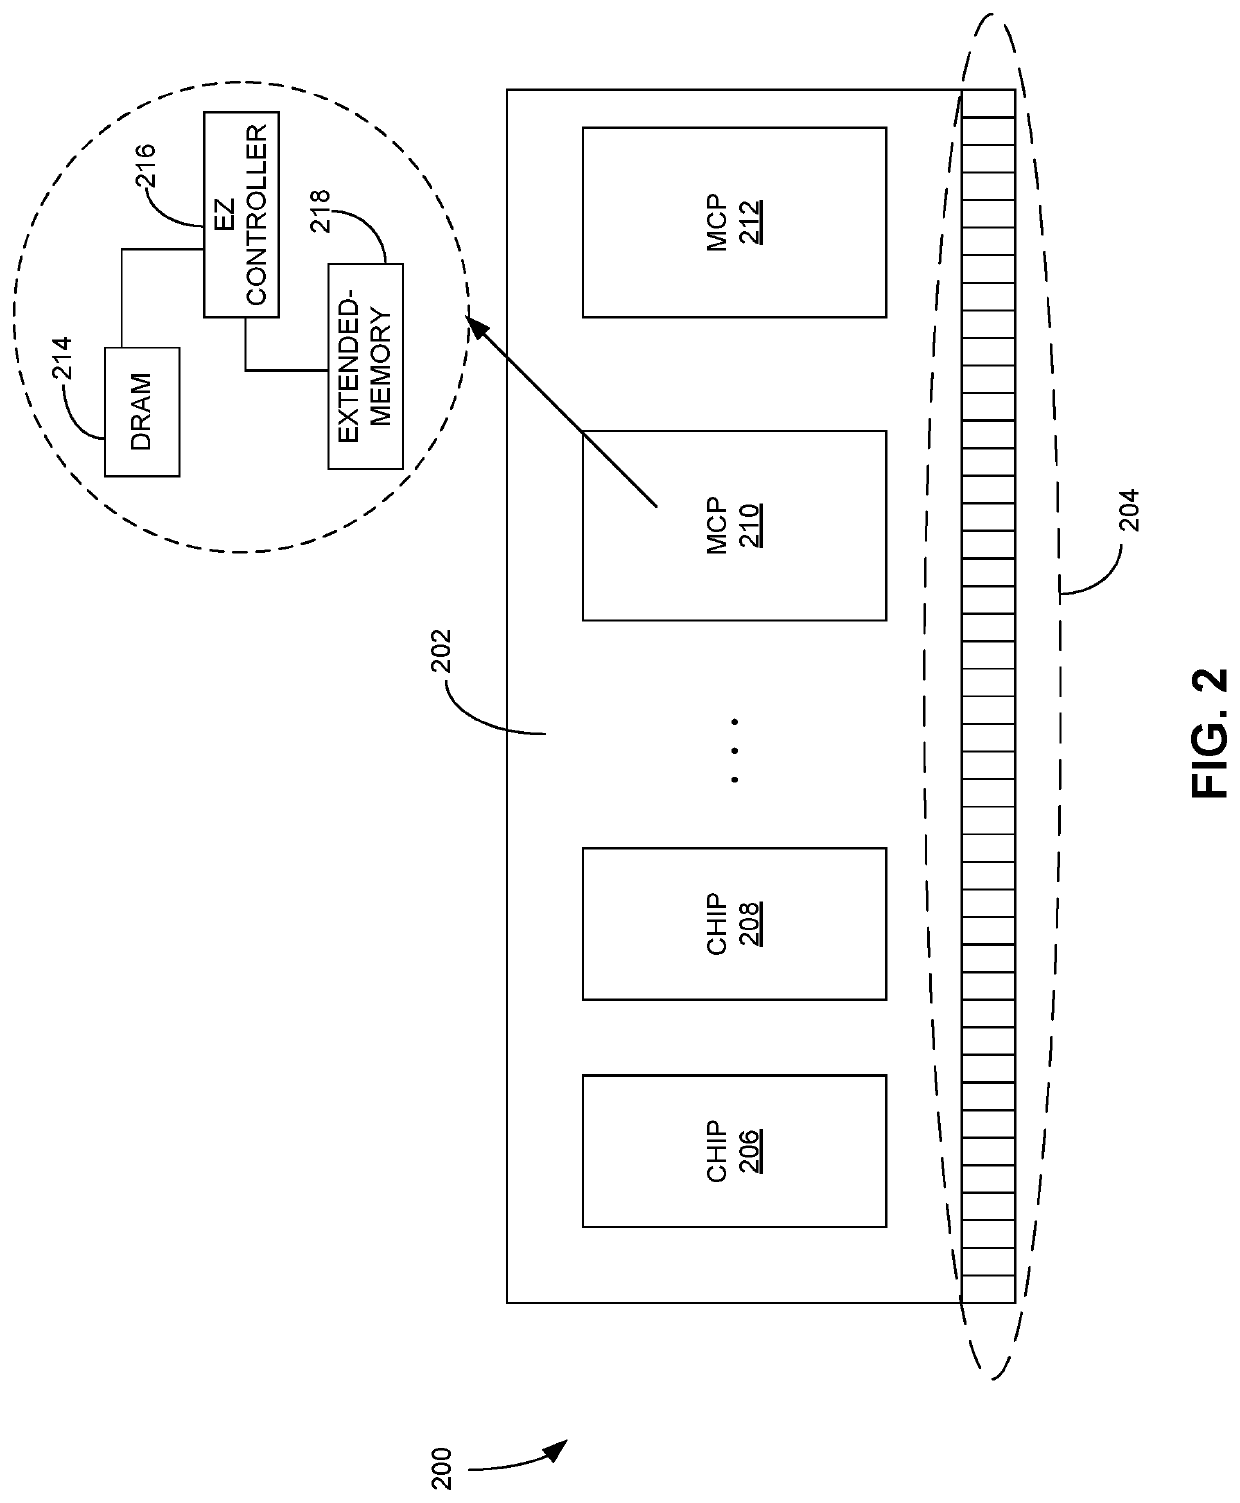 Method and system for memory expansion with low overhead latency